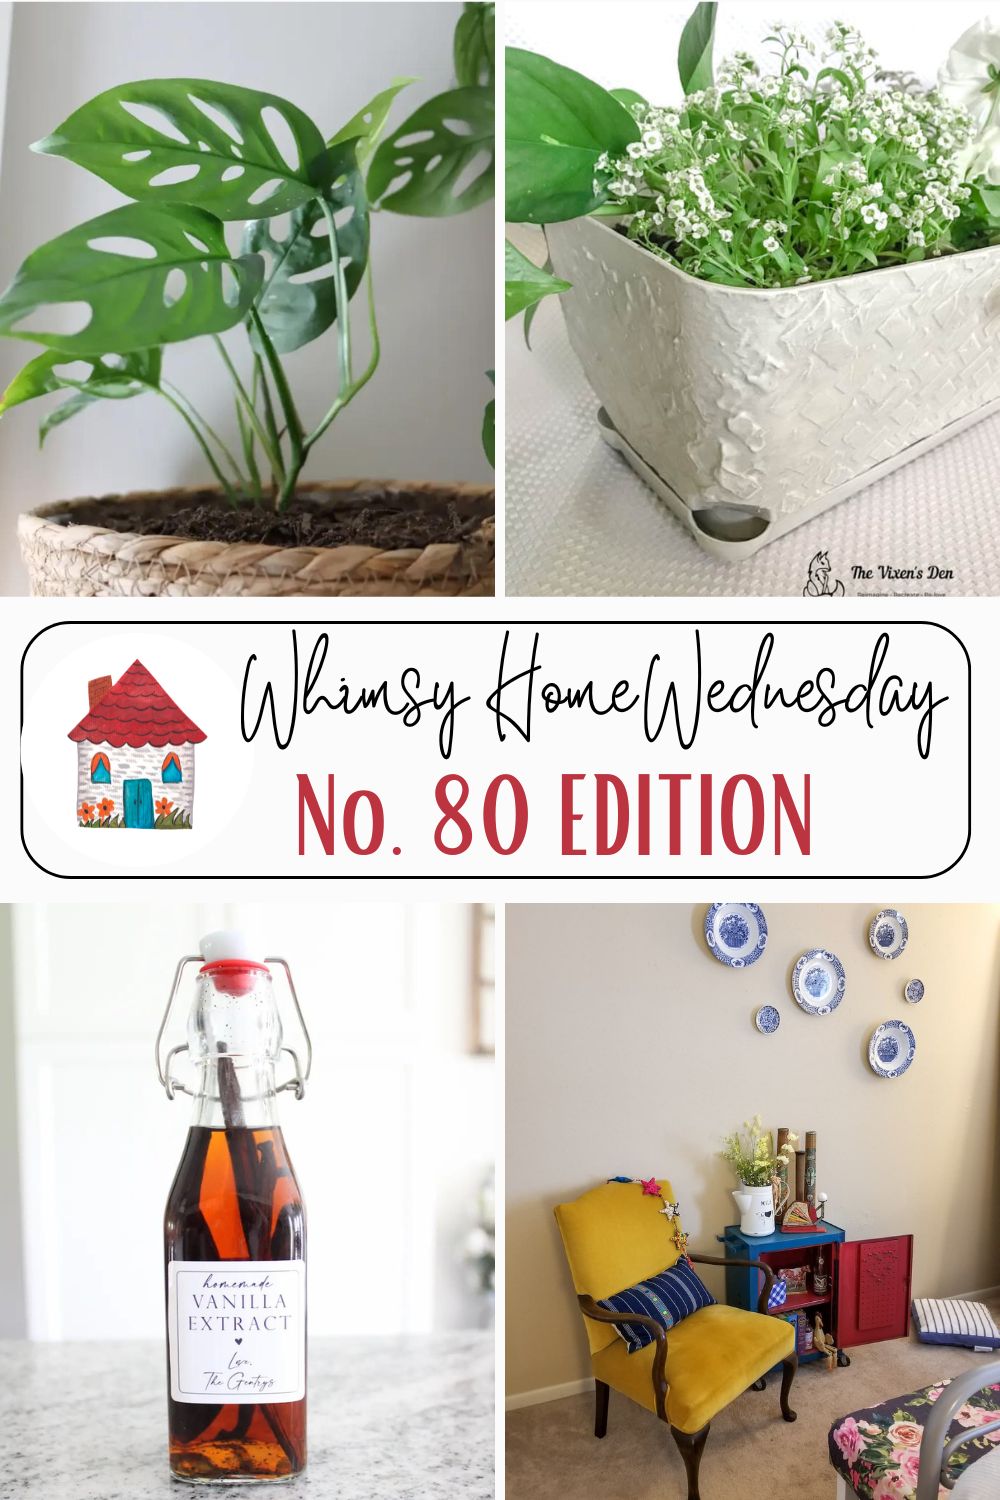 Whimsy Home Wednesday Blog Link Party No. 80